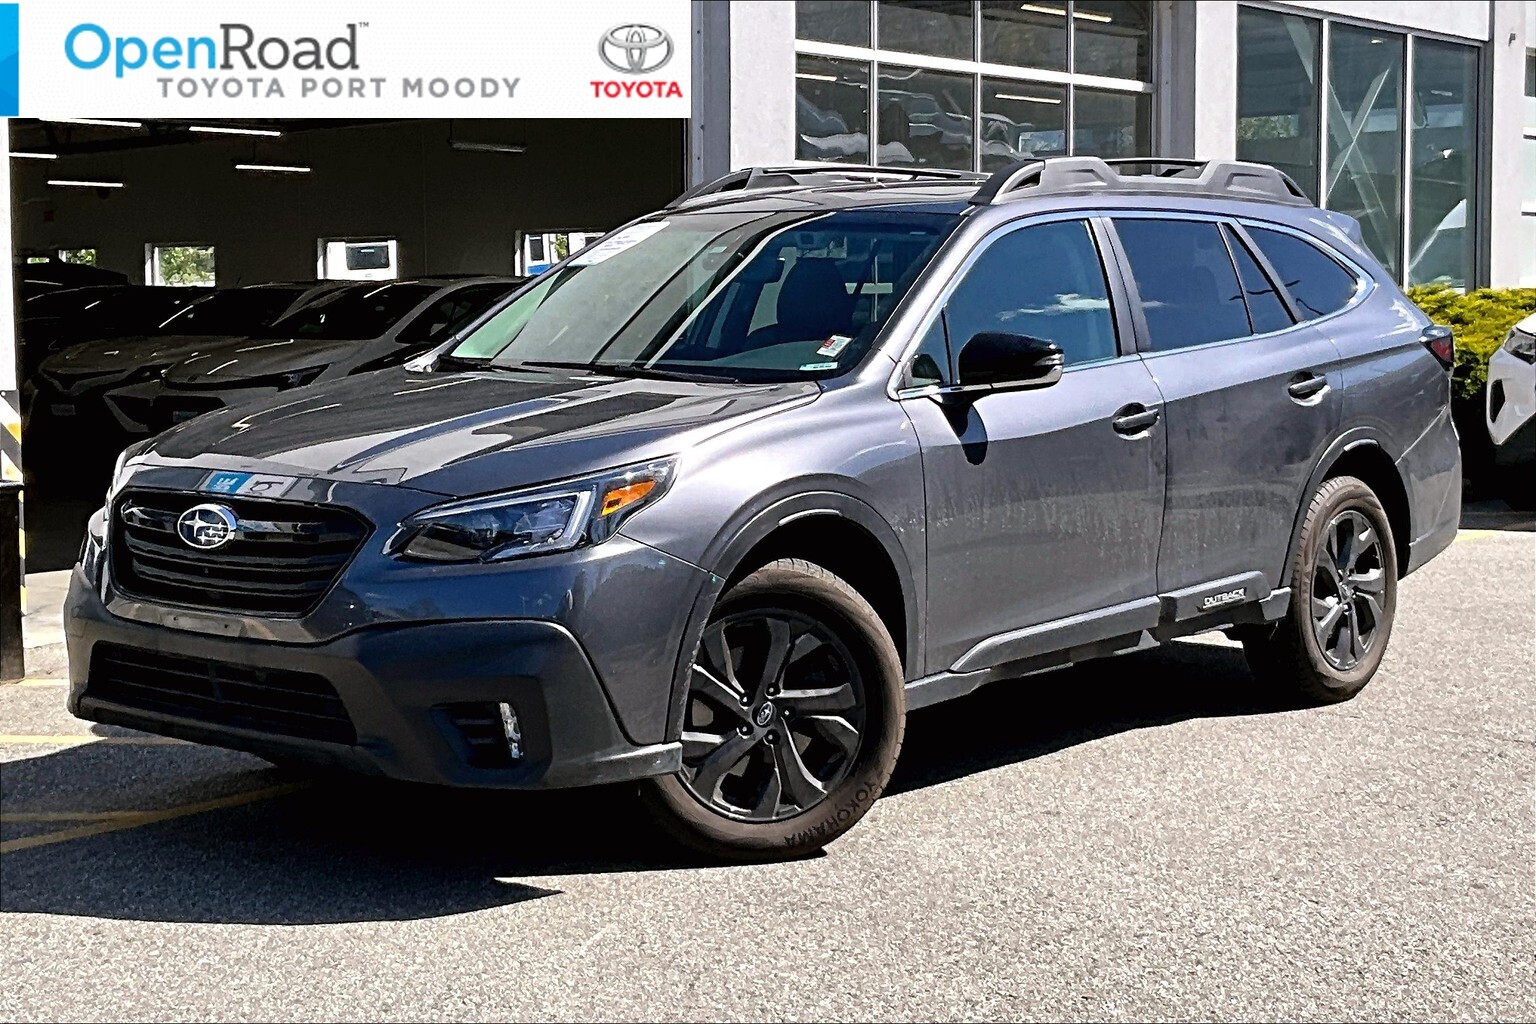 2021 Subaru Outback 2.4L Outdoor XT Turbo |OpenRoad True Price |Local 